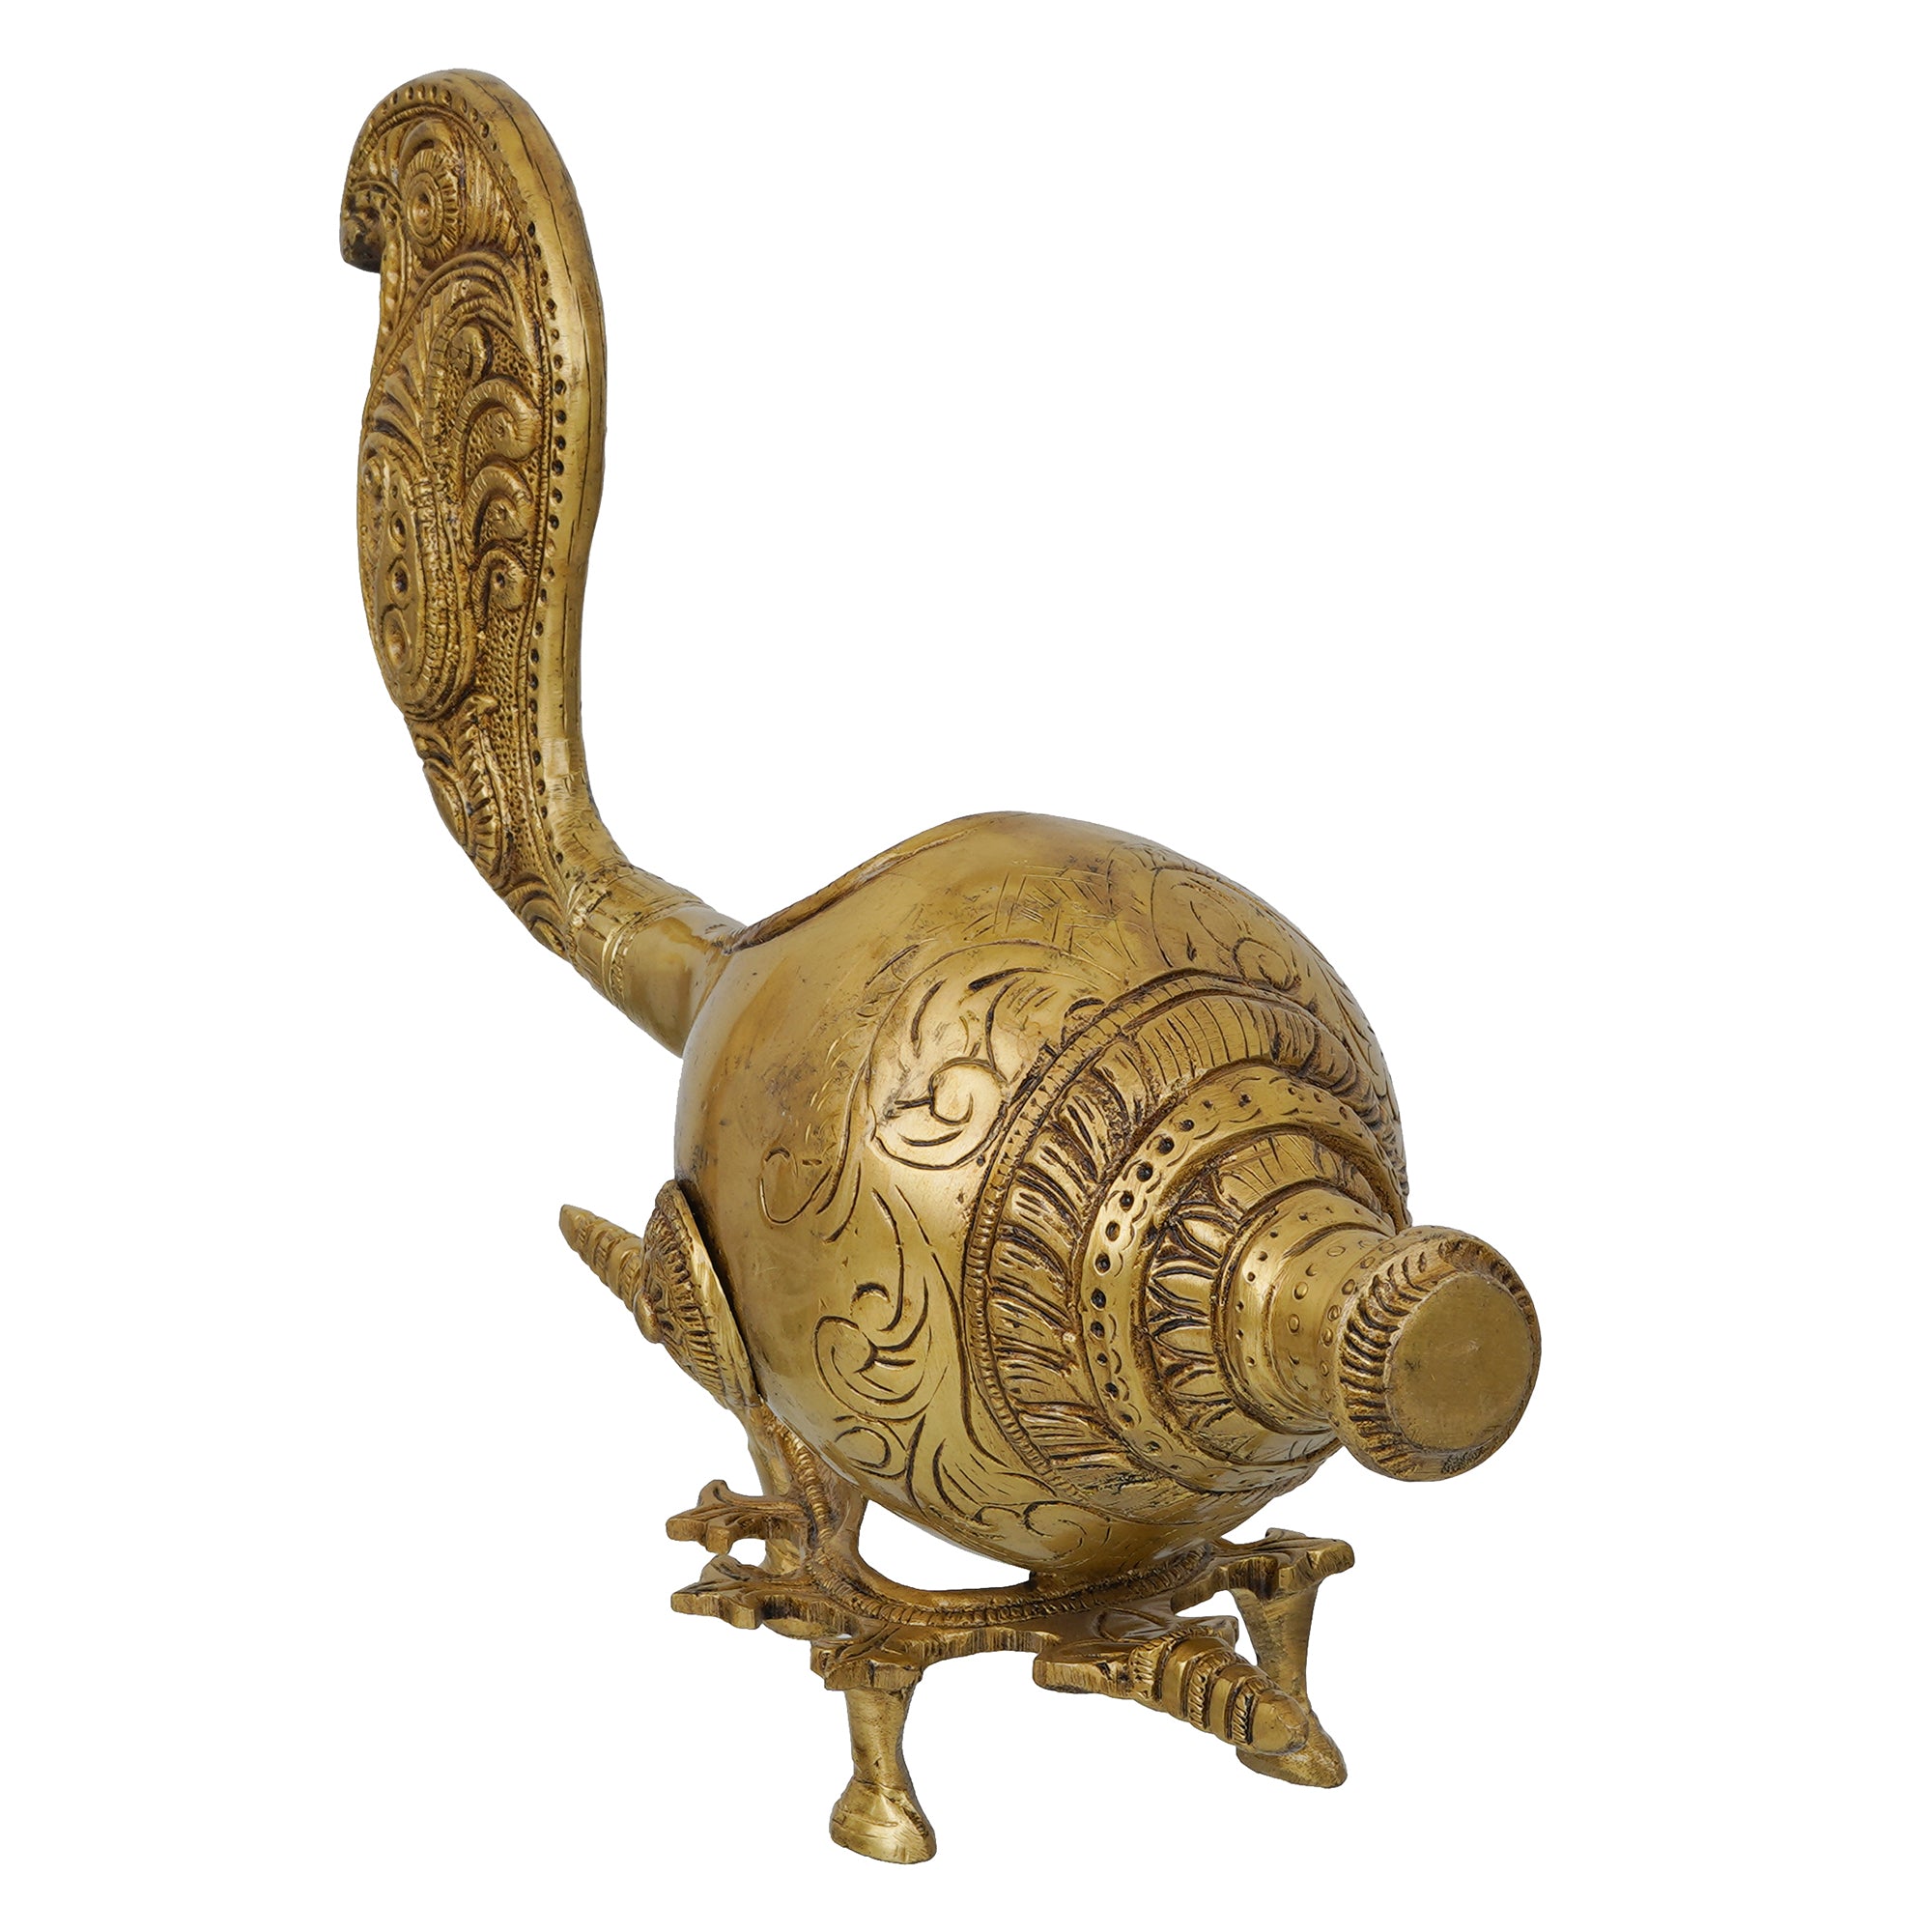 Golden Shankh (Conch) with a Stand Decorative Handcrafted Brass Showpiece 7